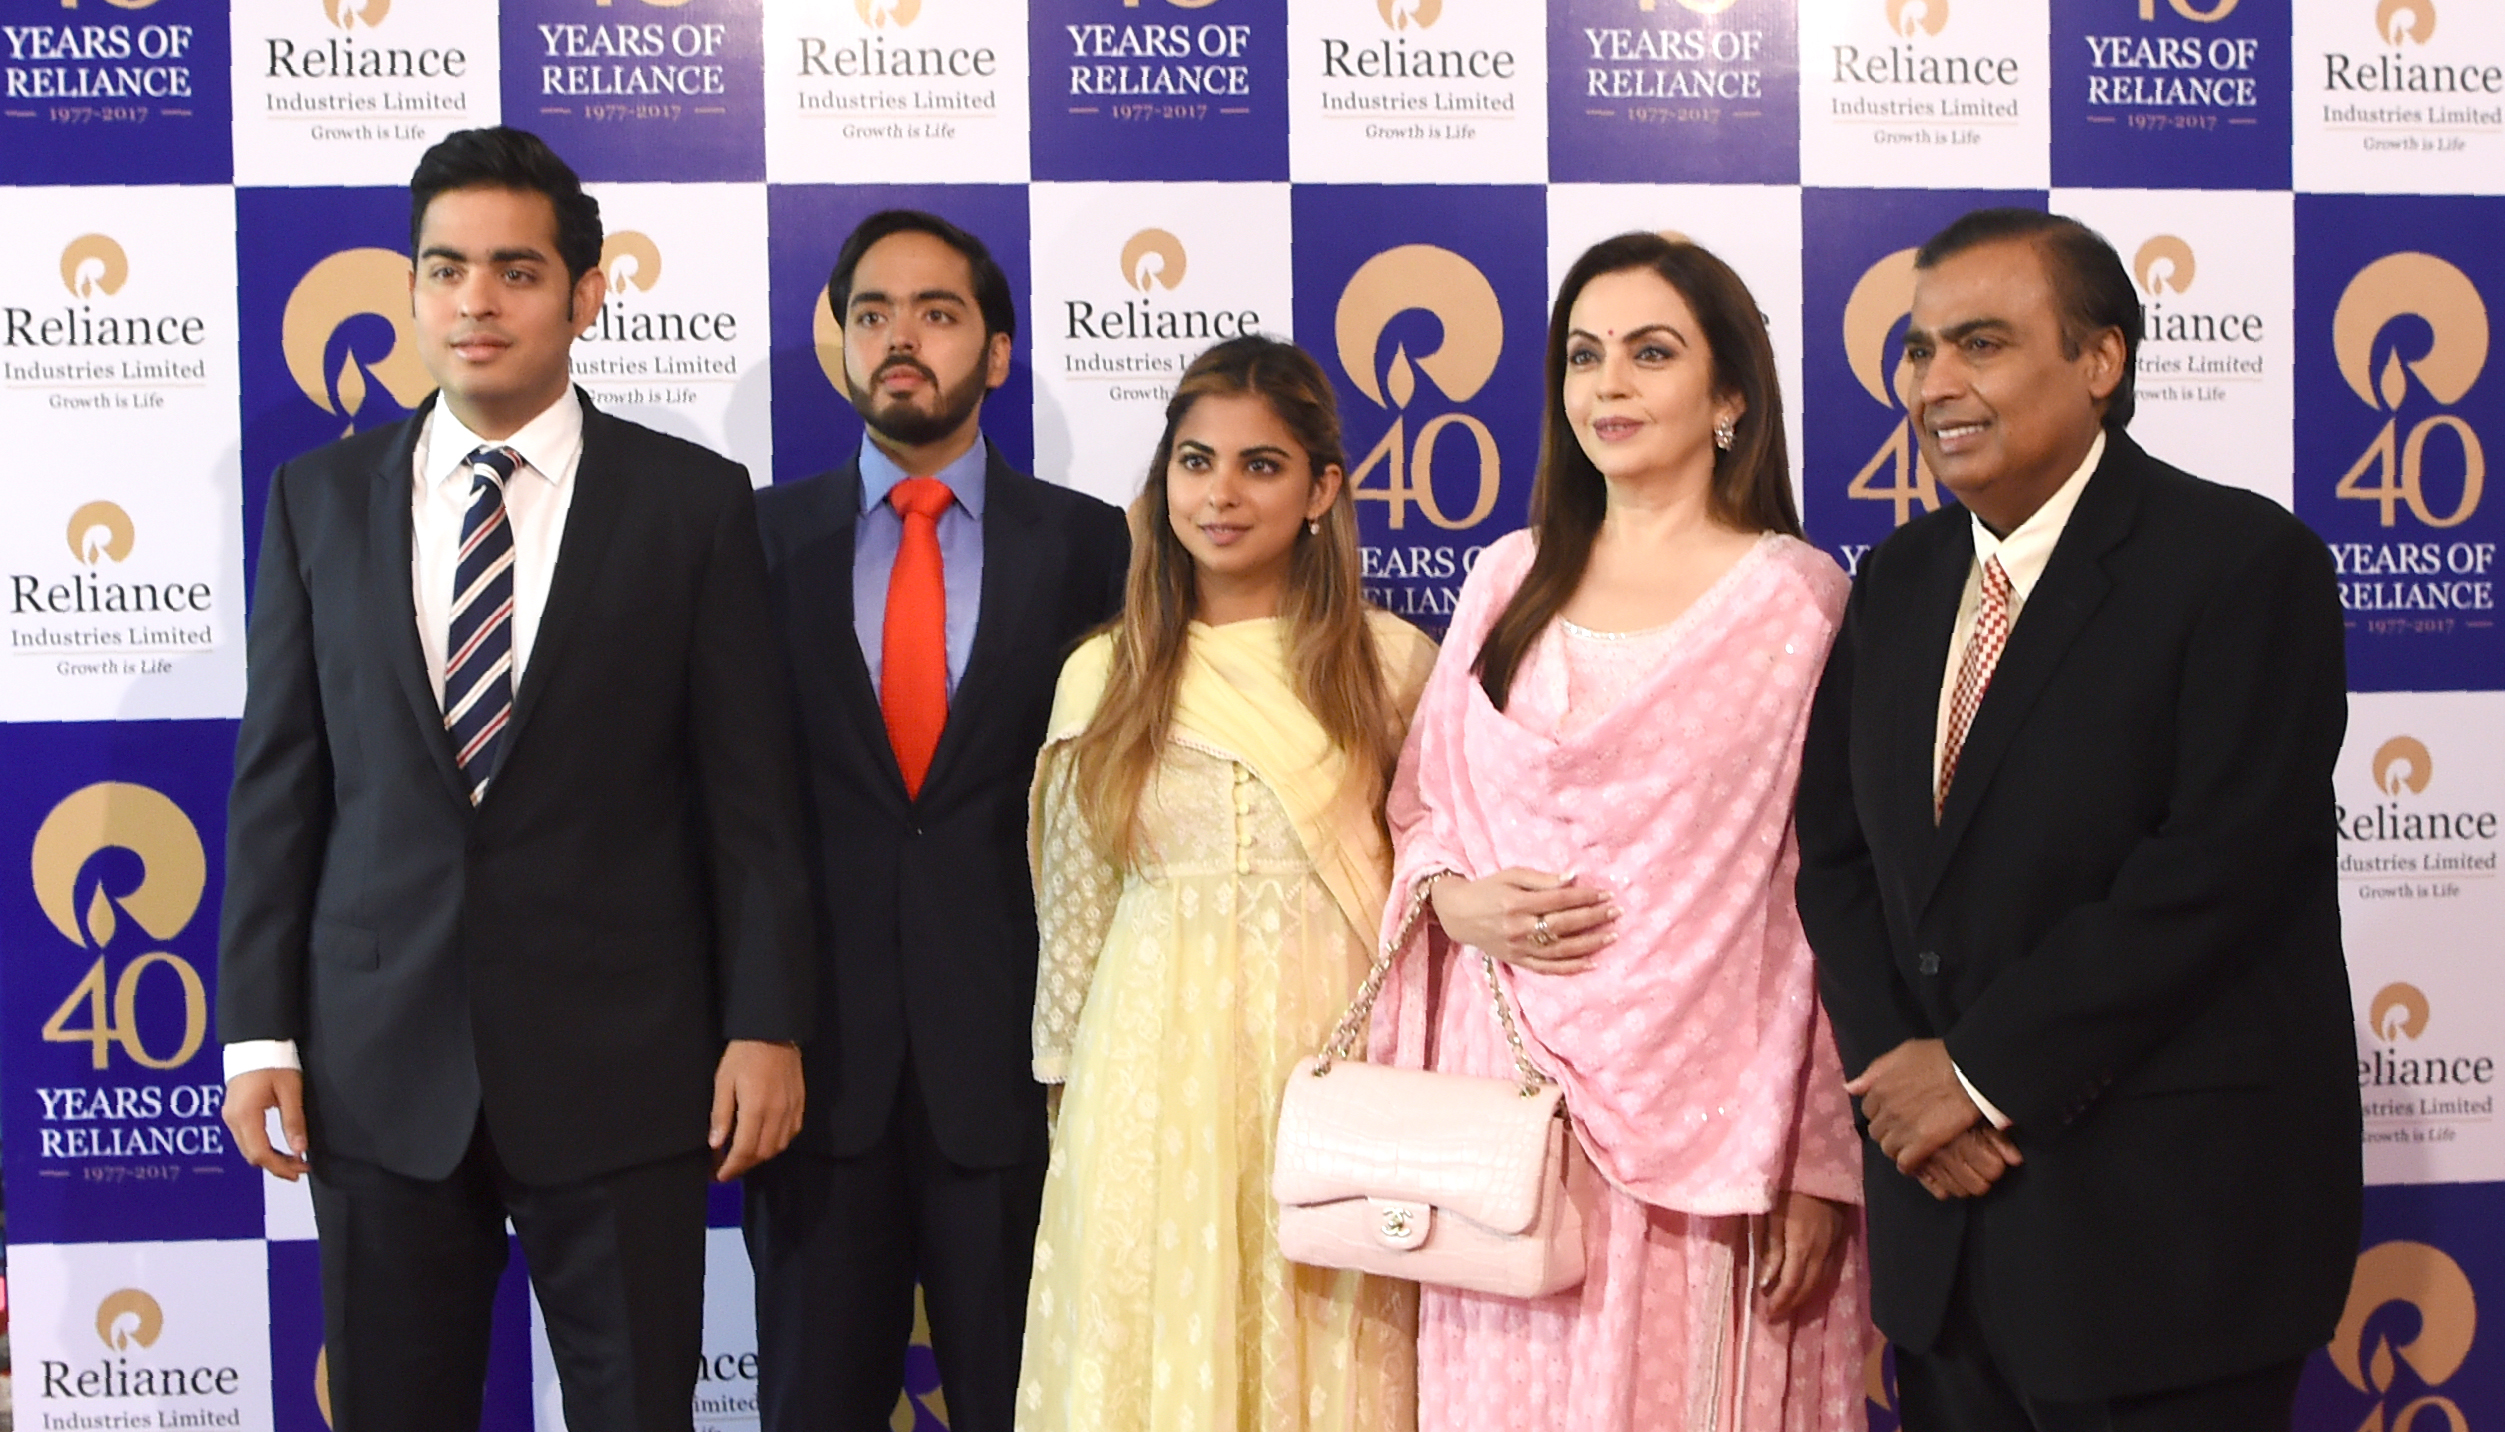 India's richest man and oil-to-telecom conglomerate Reliance Industries chairman Mukesh Ambani (R) and his wife Nita Ambani (2R) pose with their children (L-C) Akash Ambani, Anant Ambani and Isha Ambani as they arrive for the company's 40th AGM in Mumbai on July 21, 2017. (INDRANIL MUKHERJEE/AFP via Getty Images)